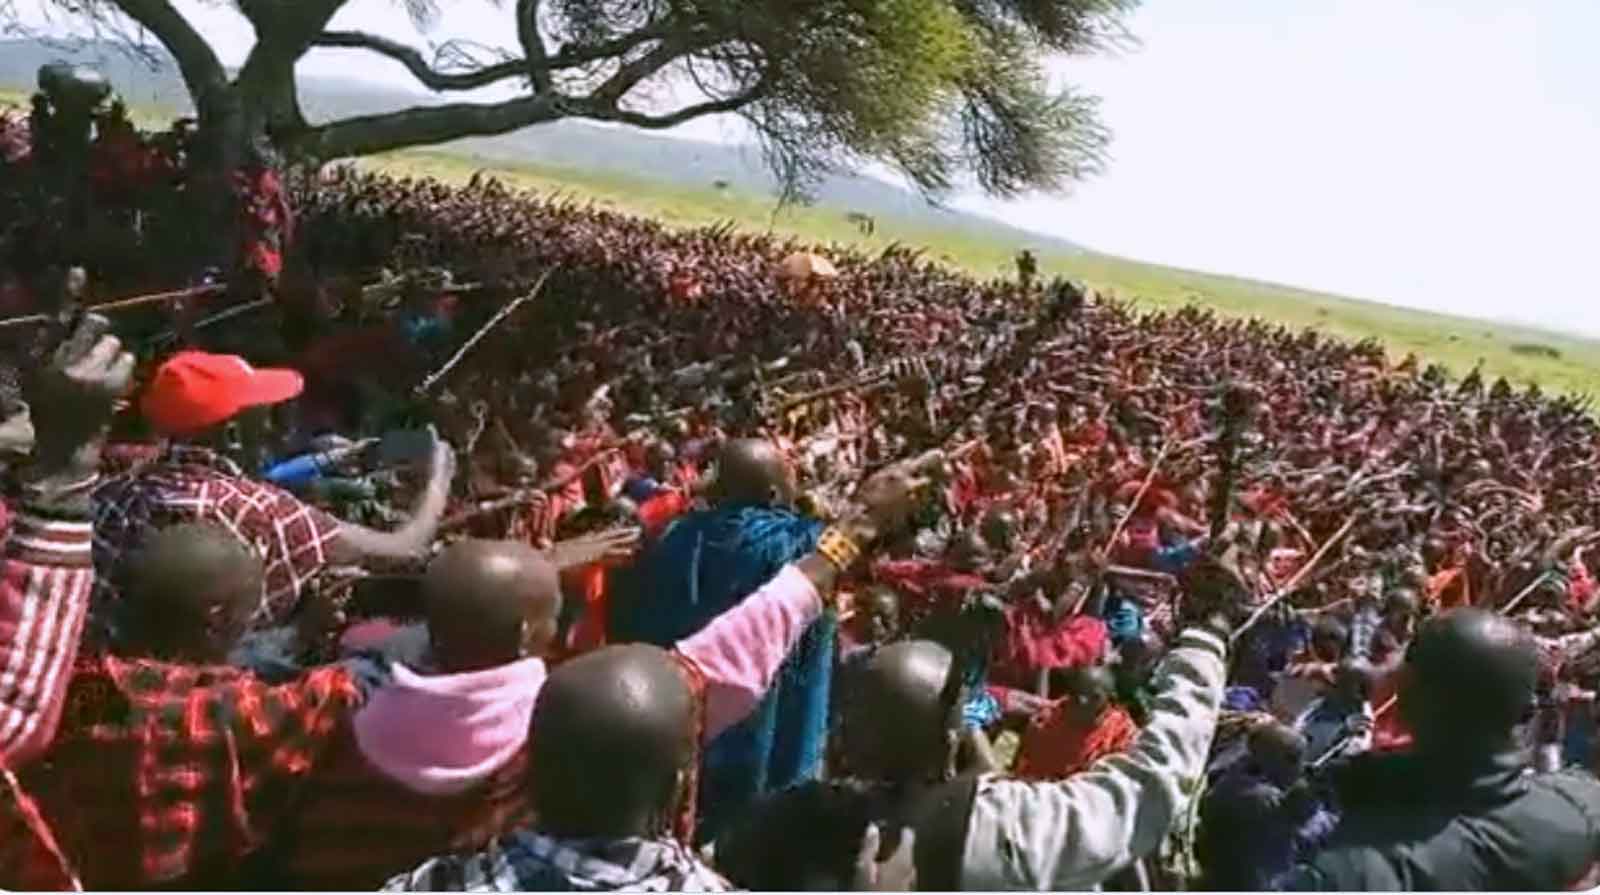 Ongoing protests by Maasai residents against the planned evictions from the NCA